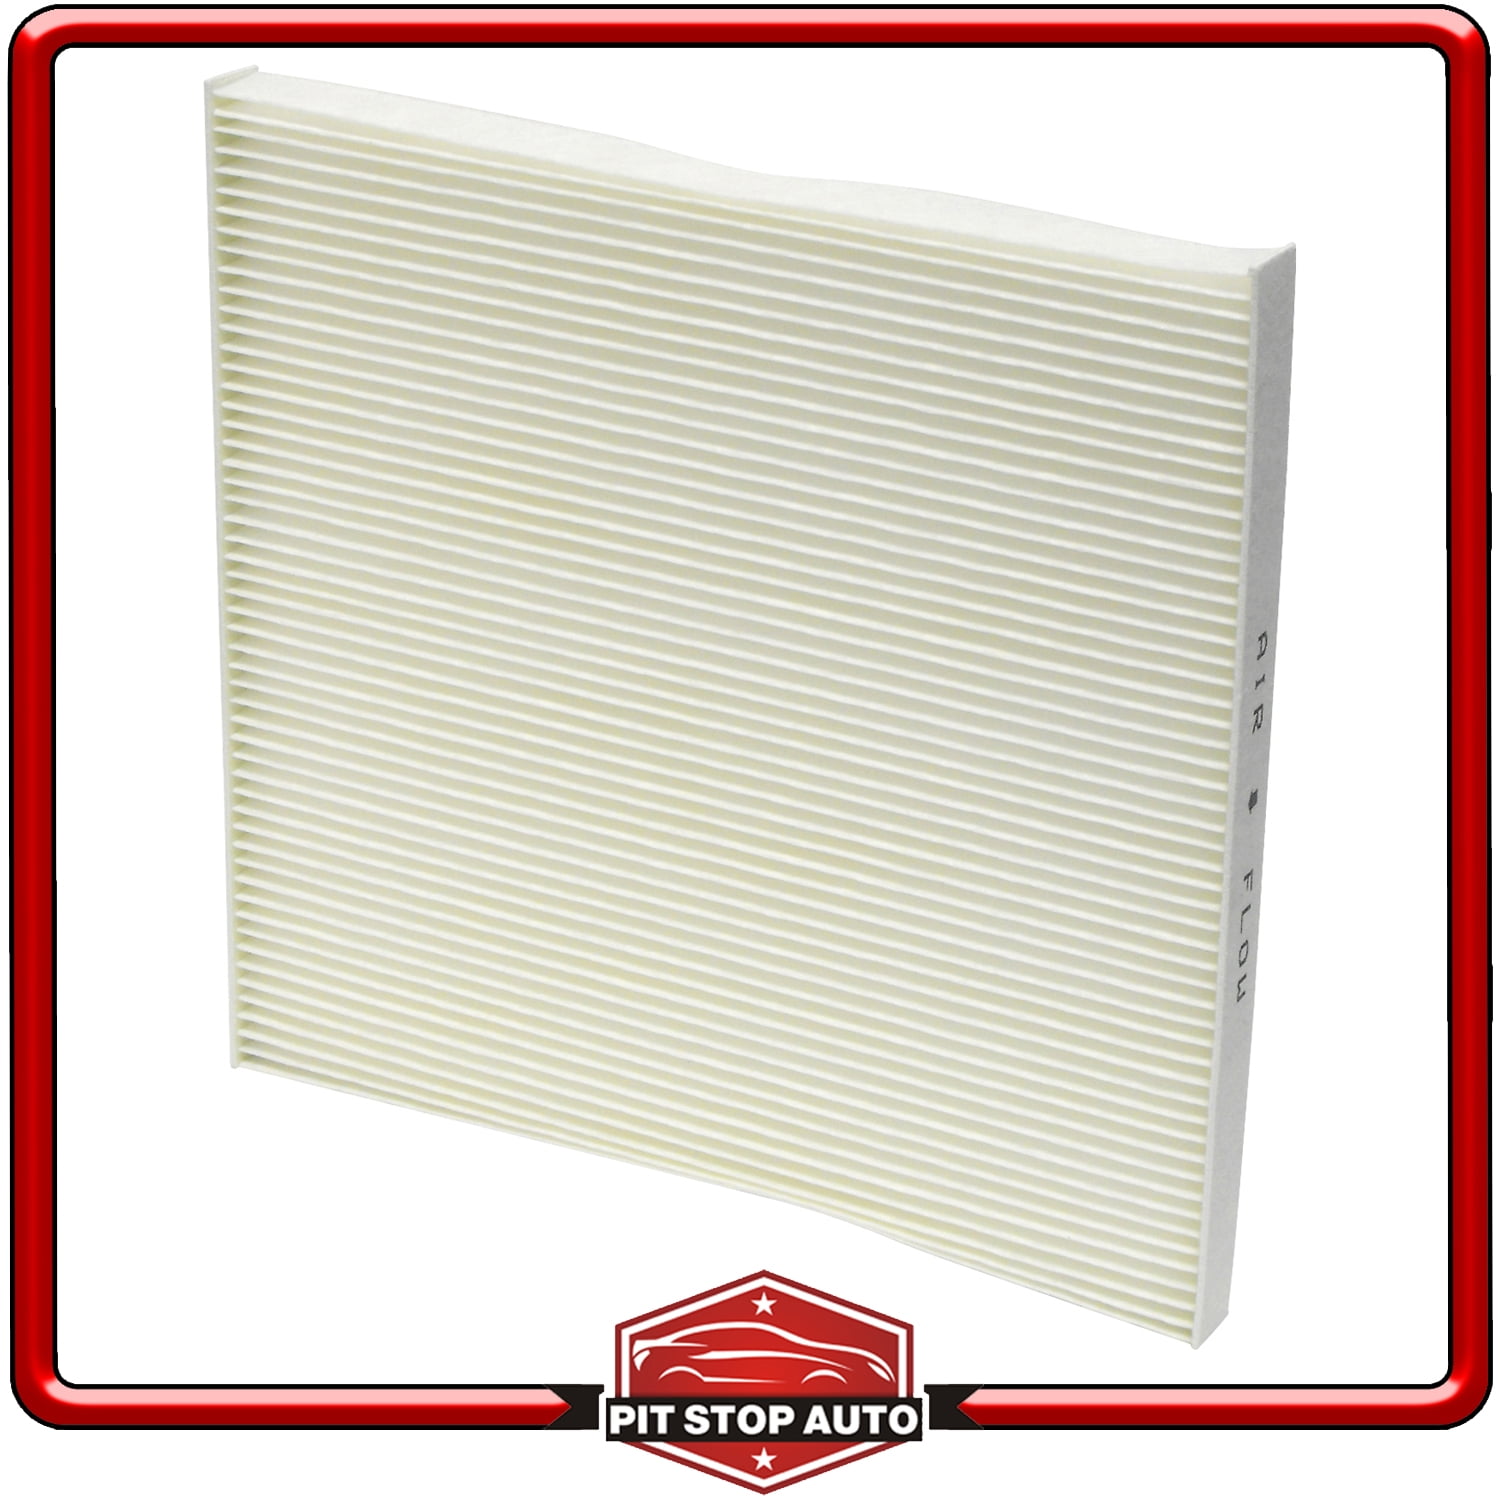 OEM Type NISSAN Cabin Air Filter for Nissan Altima Maxima Murano Quest